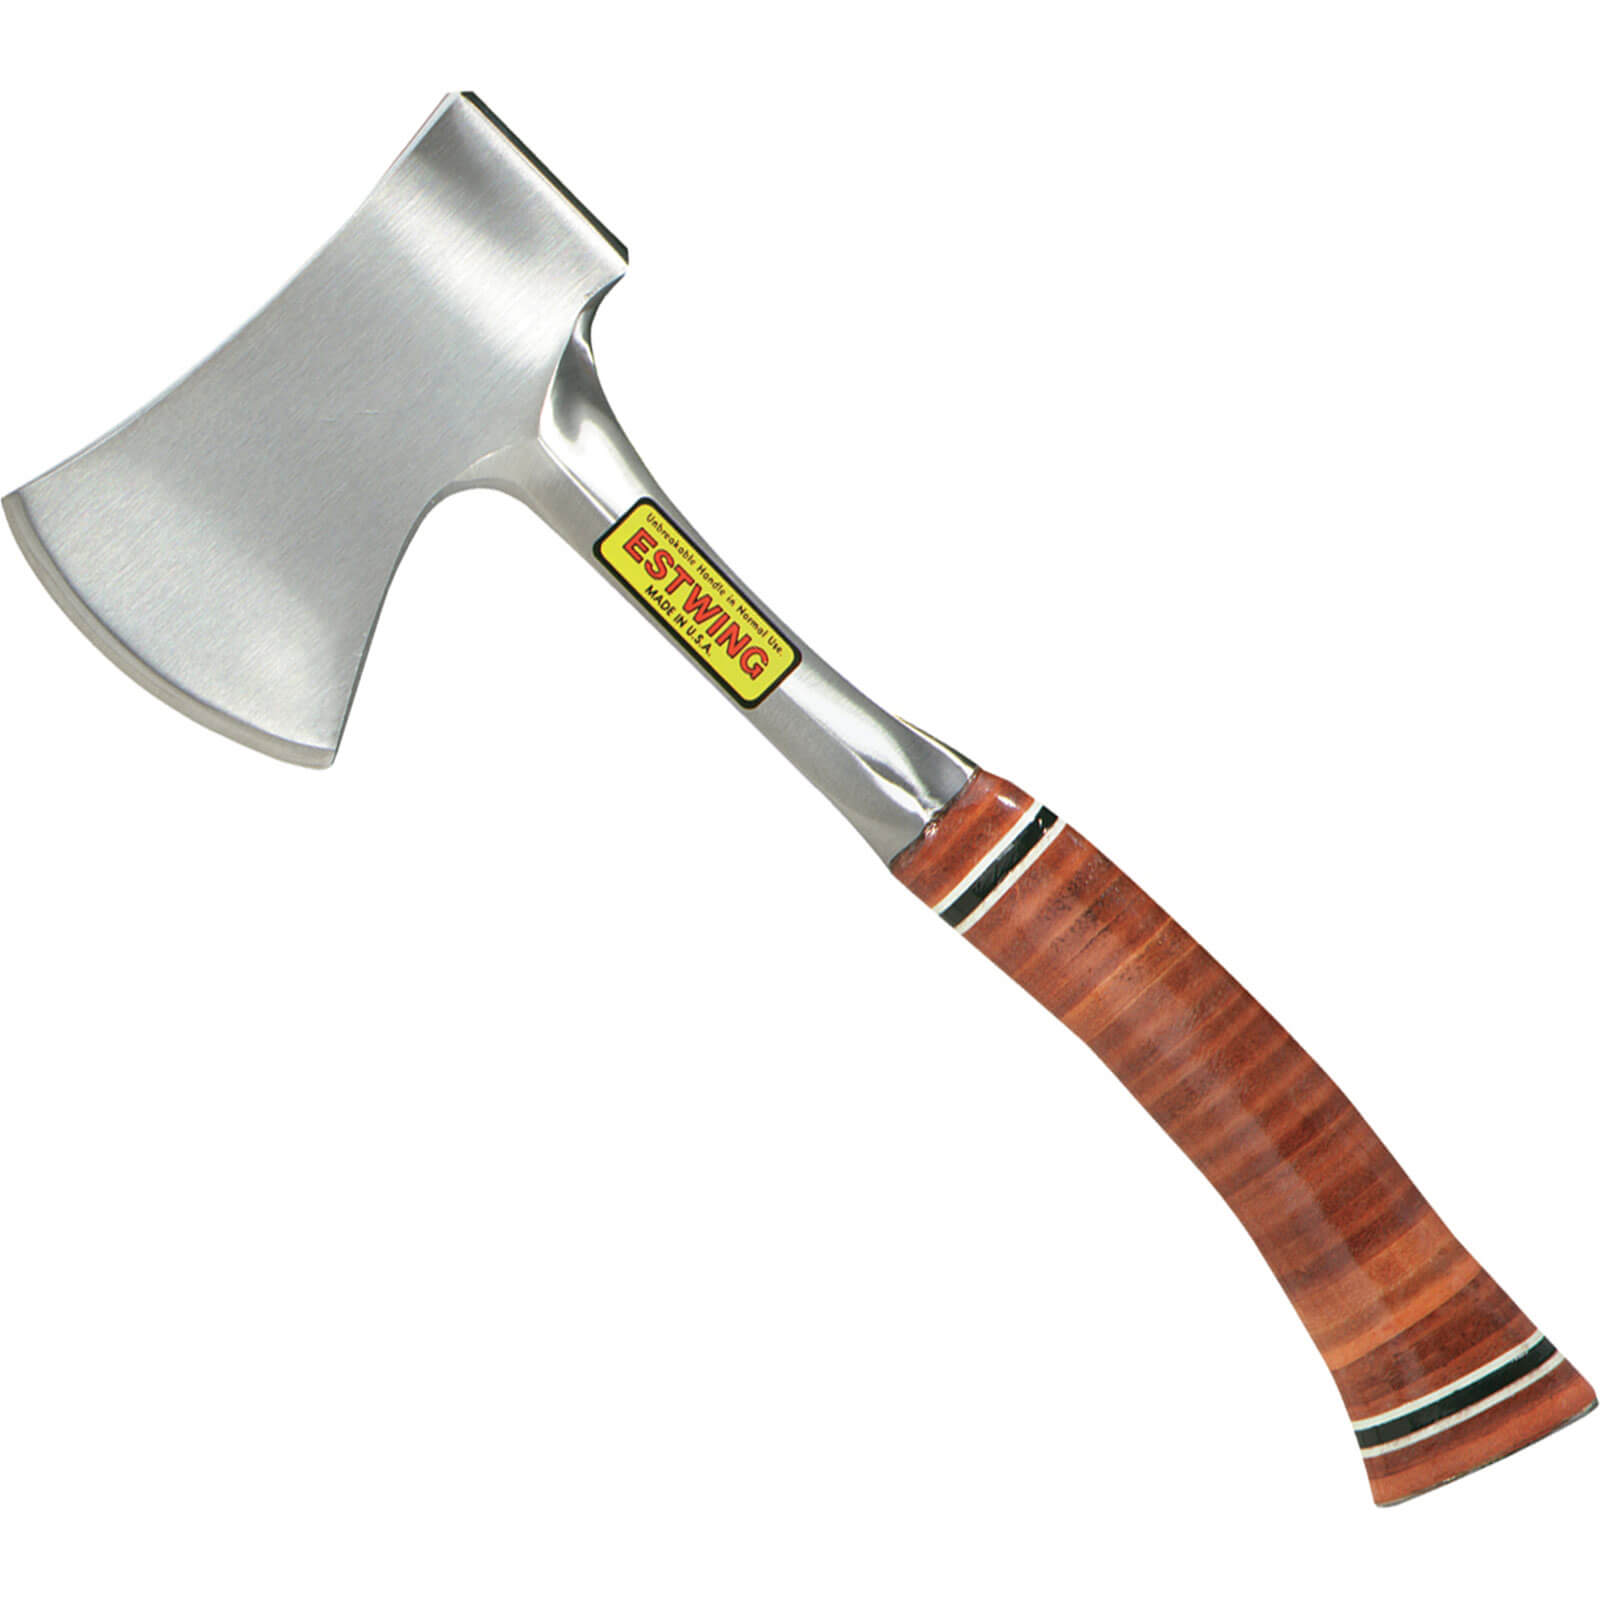 Estwing 24oz Sportsmans Axe with Leather Grip 356mm